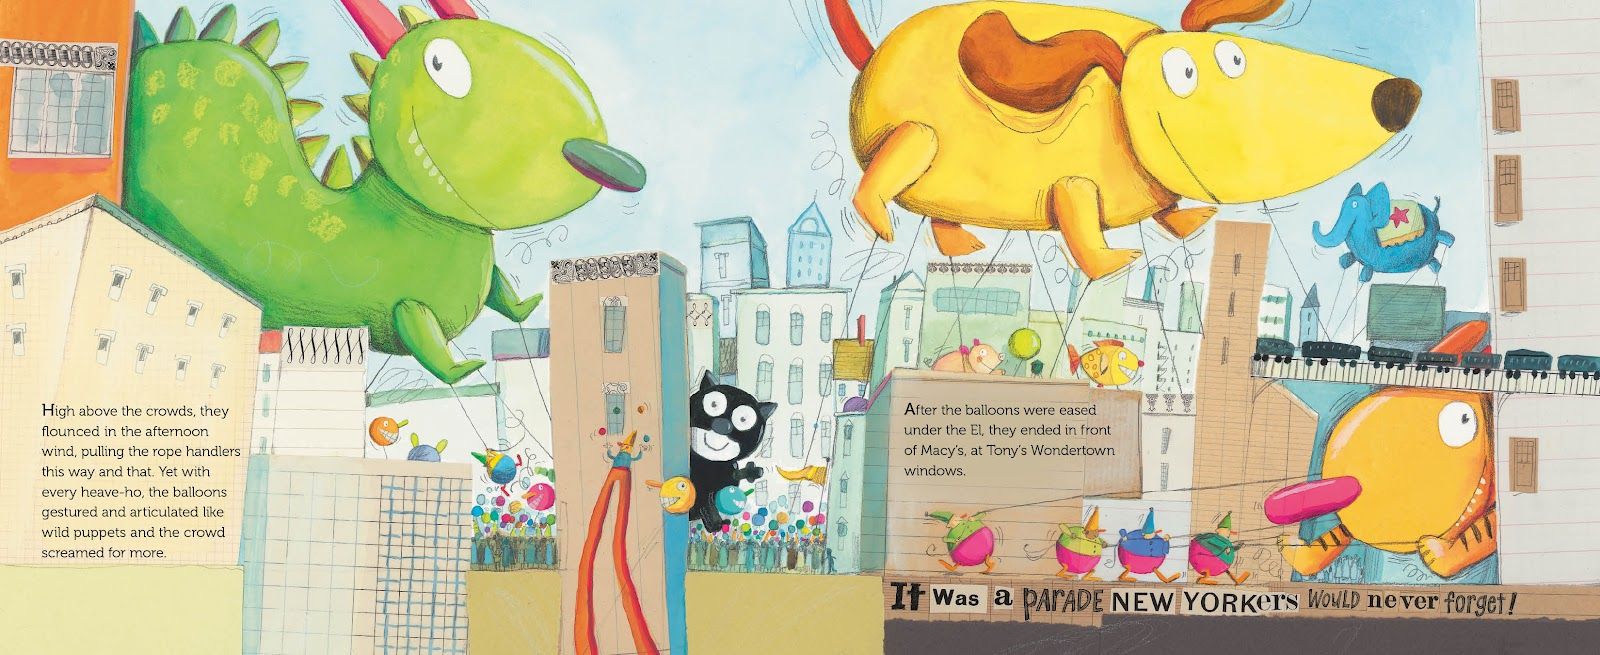 Learn about being a puppeteer at the Macy's Parade! : Balloons Over Broadway by Melissa Sweet | Thanksgiving books for kids